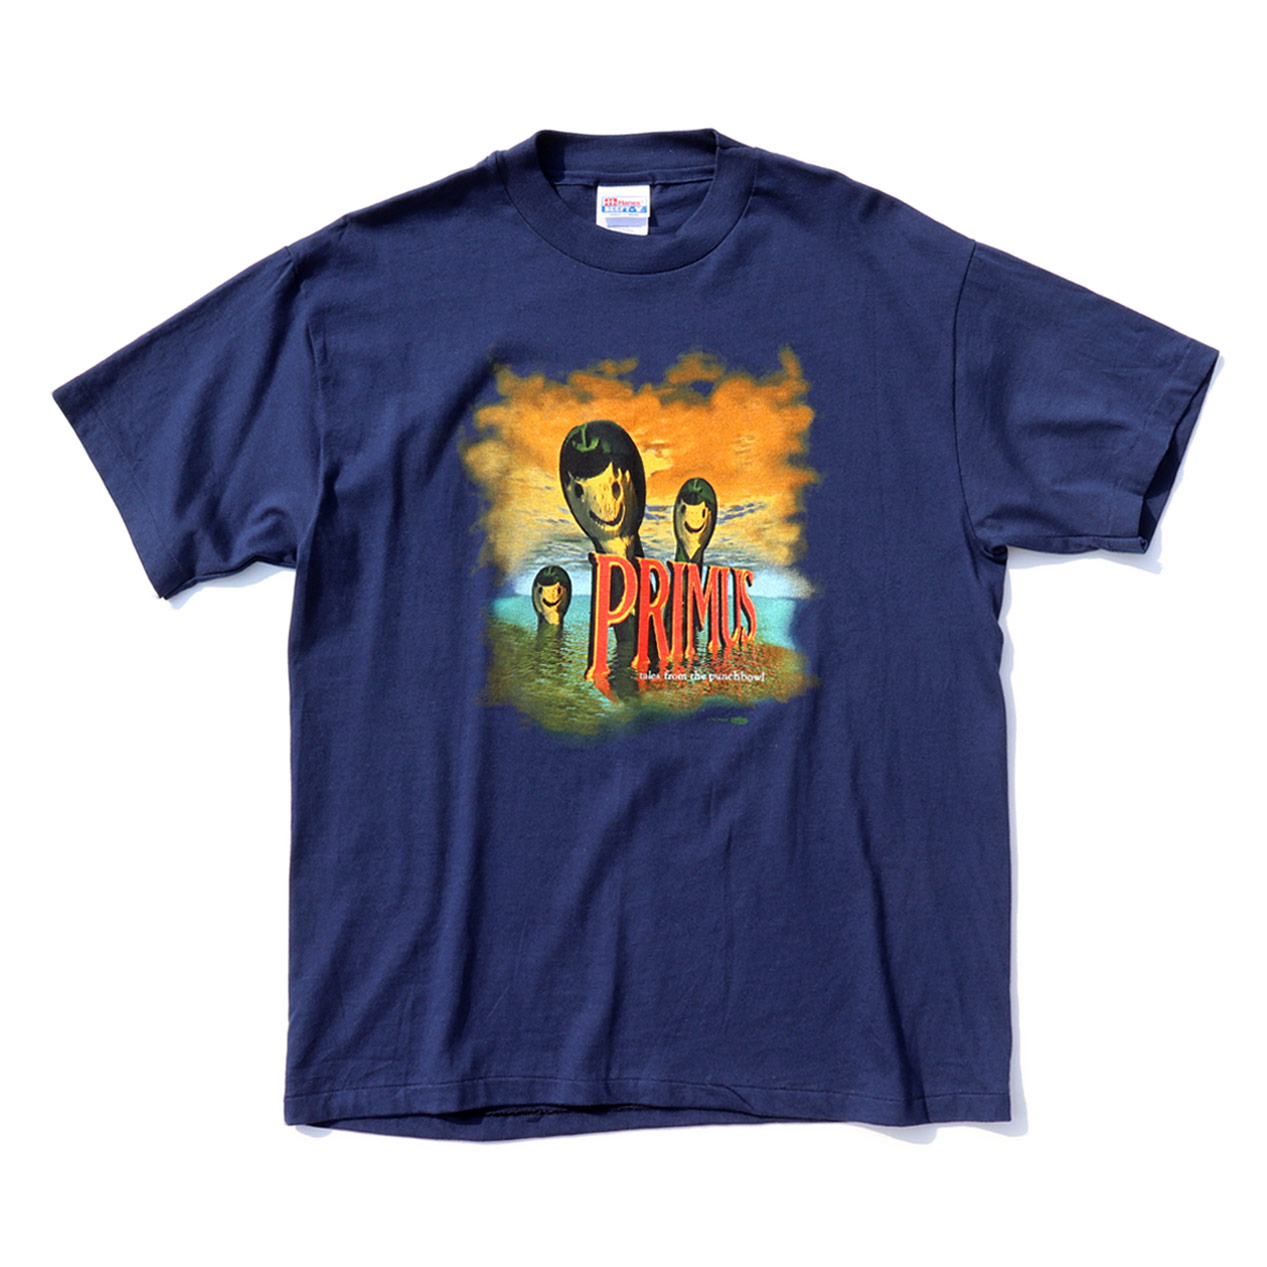 POST JUNK / 90's PRIMUS ”TALES FROM THE PUNCHBOWL” USA製 Tシャツ 